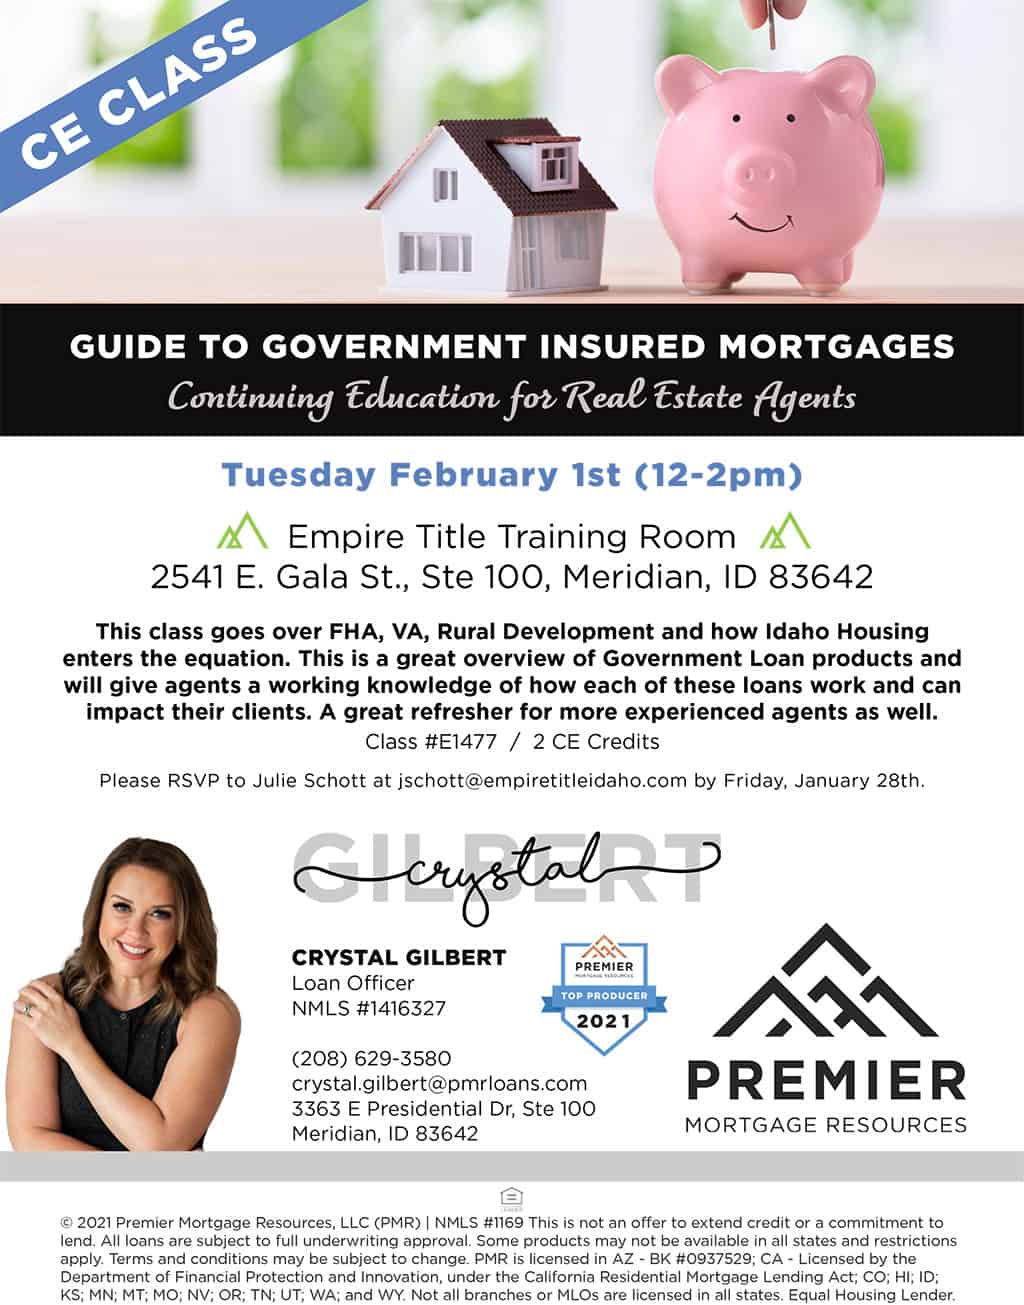 Guide to Government Insured Mortgages